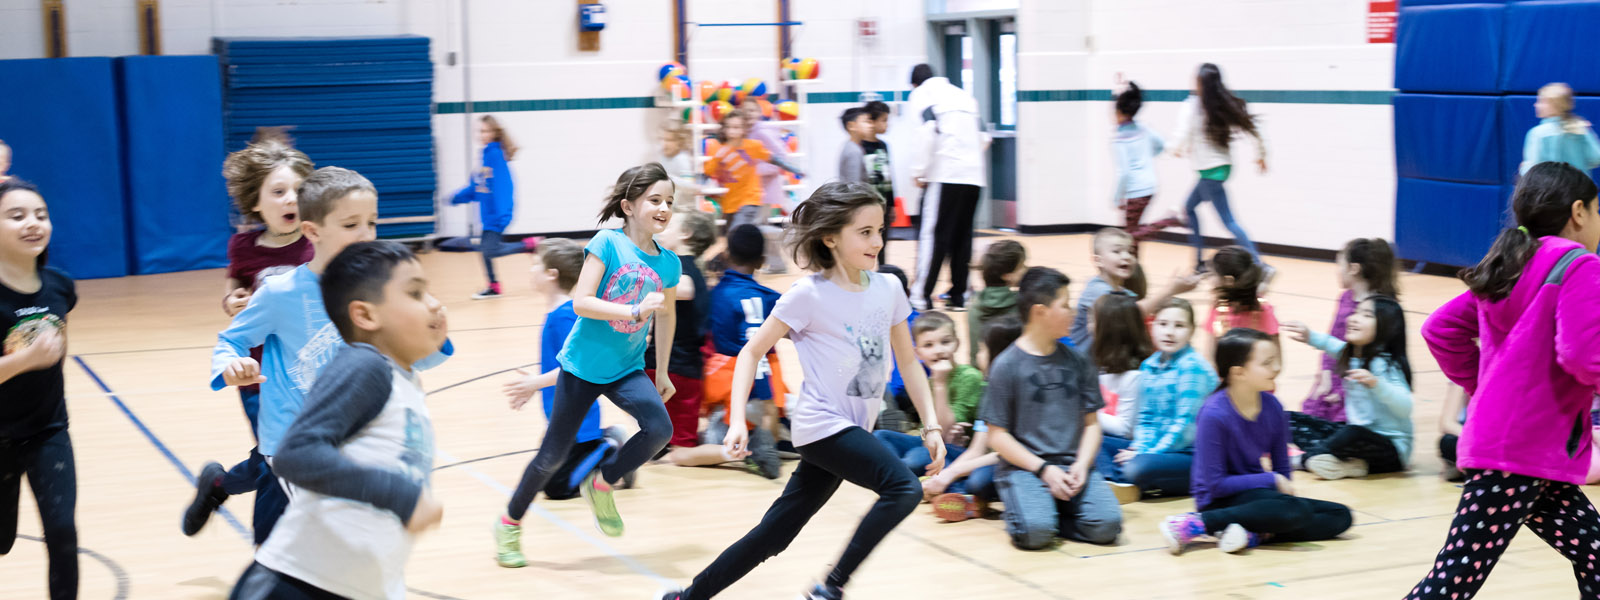 students running in gym